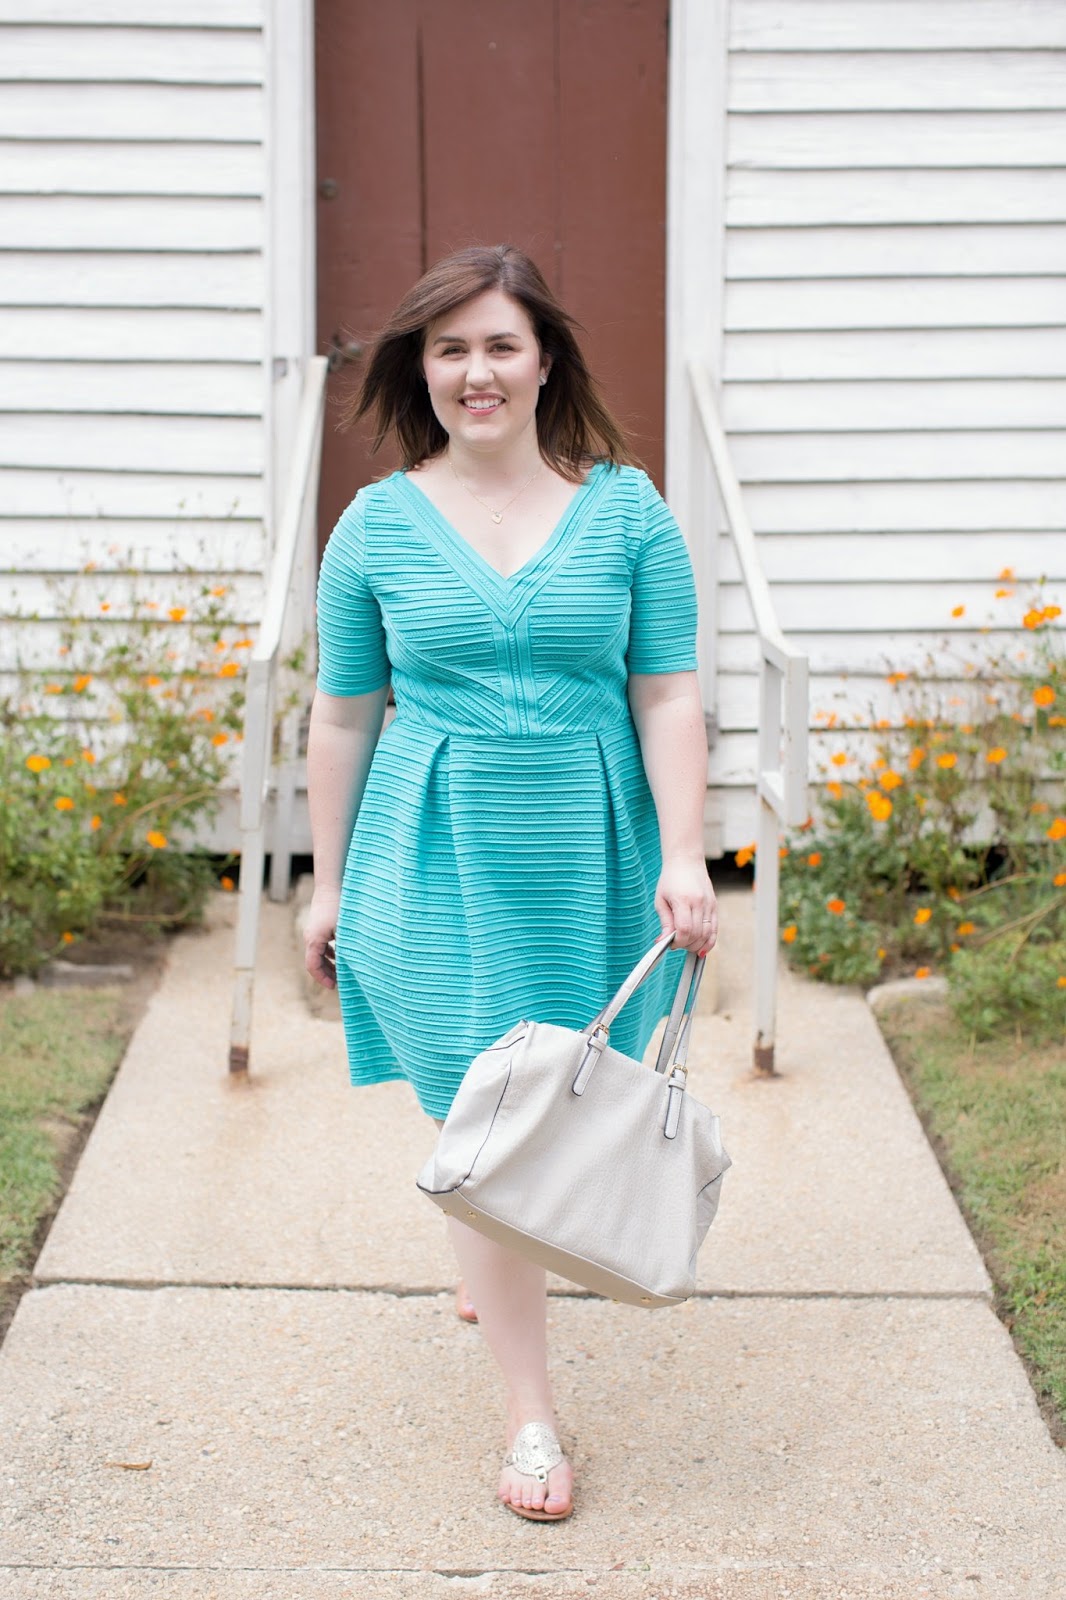 Popular North Carolina style blogger Rebecca Lately shares her favorite items from Stitch Fix. Clear here to see what she loves now!